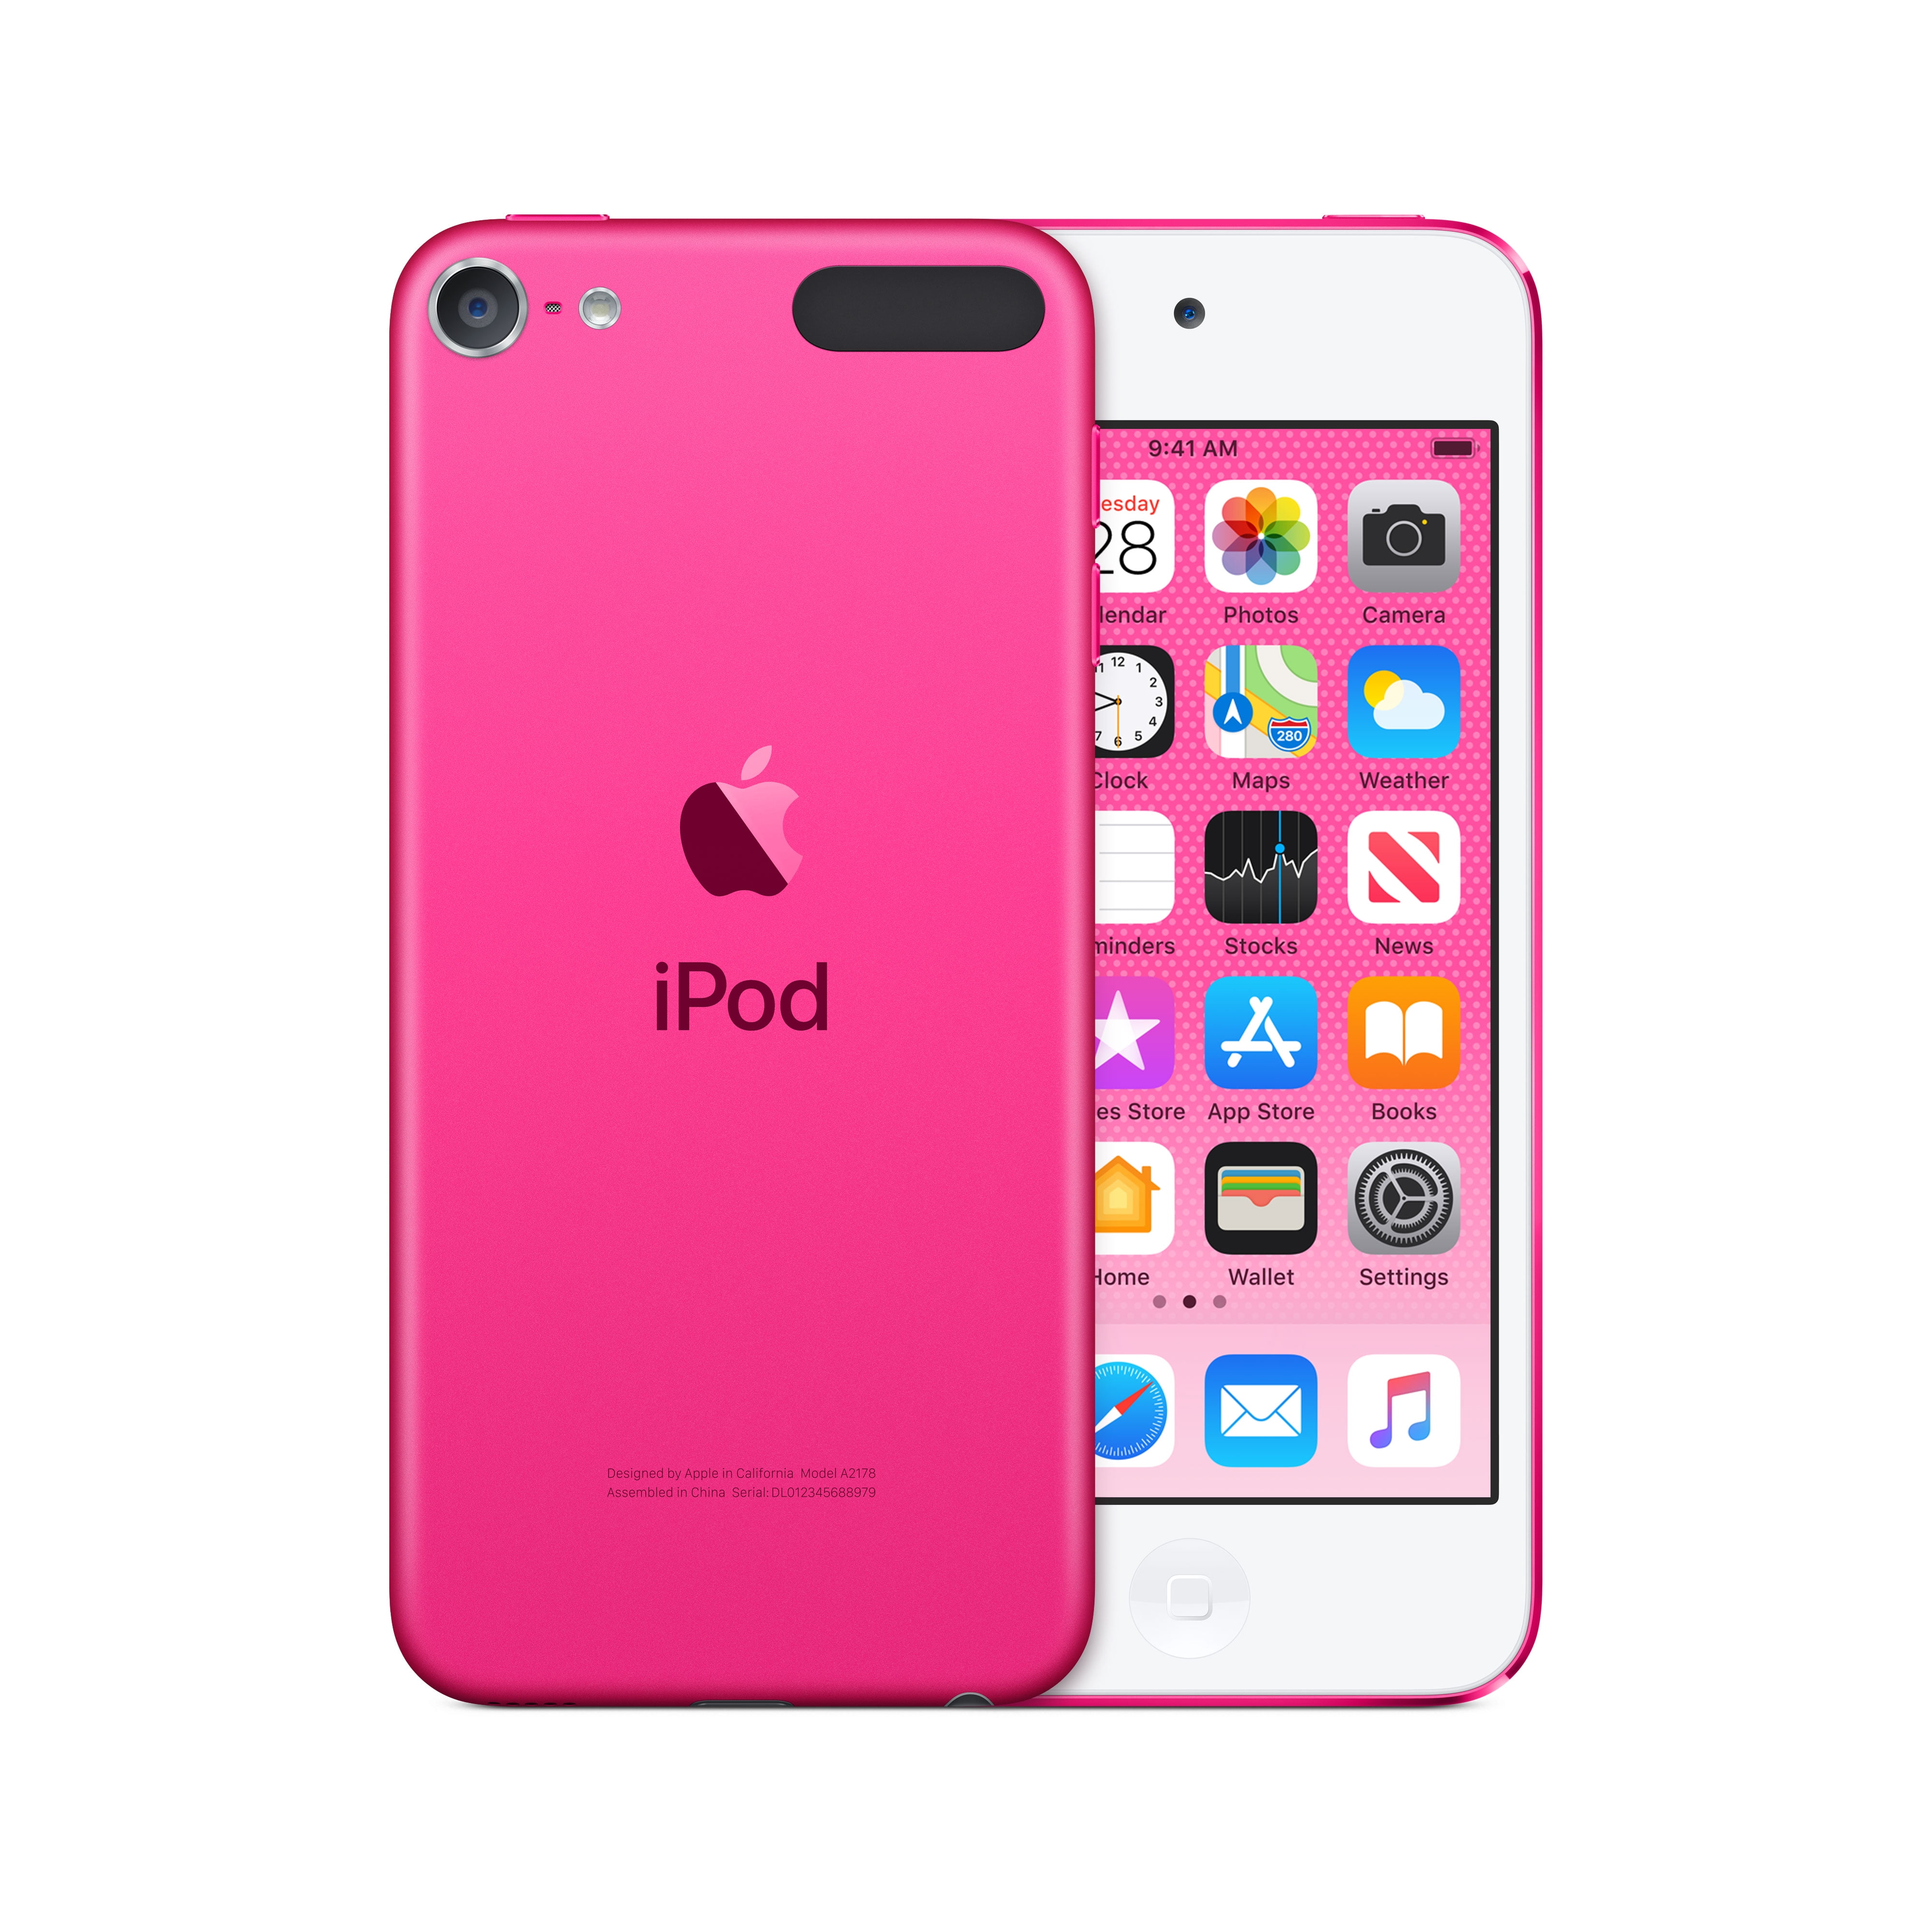 PRODUCTRED③型式iPod touch 第７世代